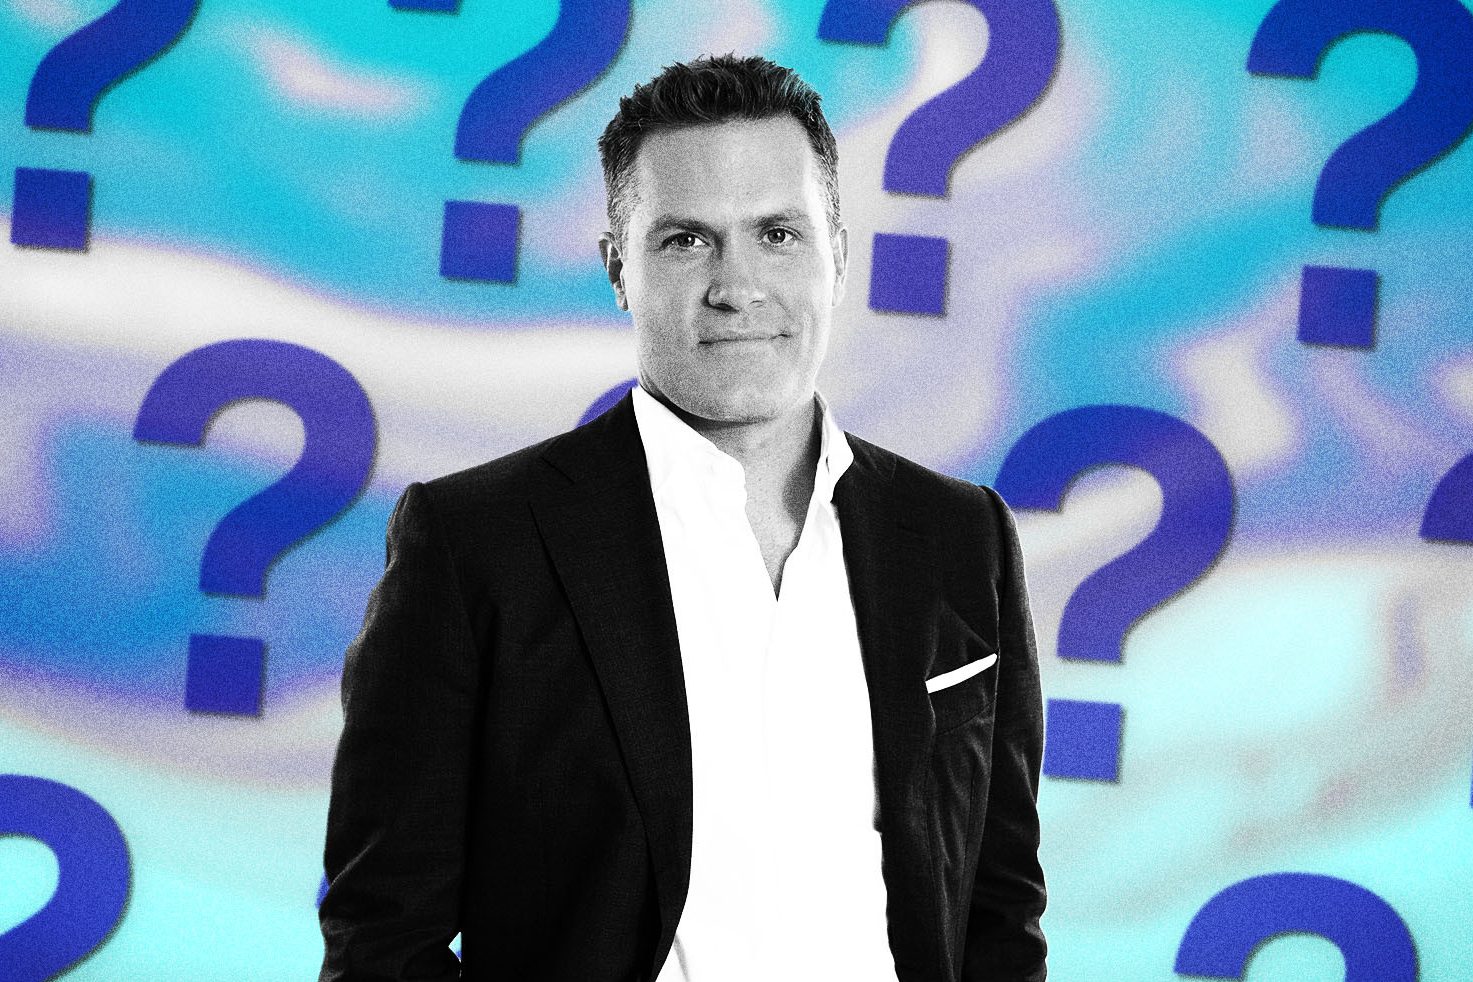 Asking Kyle Brandt 10 Questions About '10 Questions' on Spotify